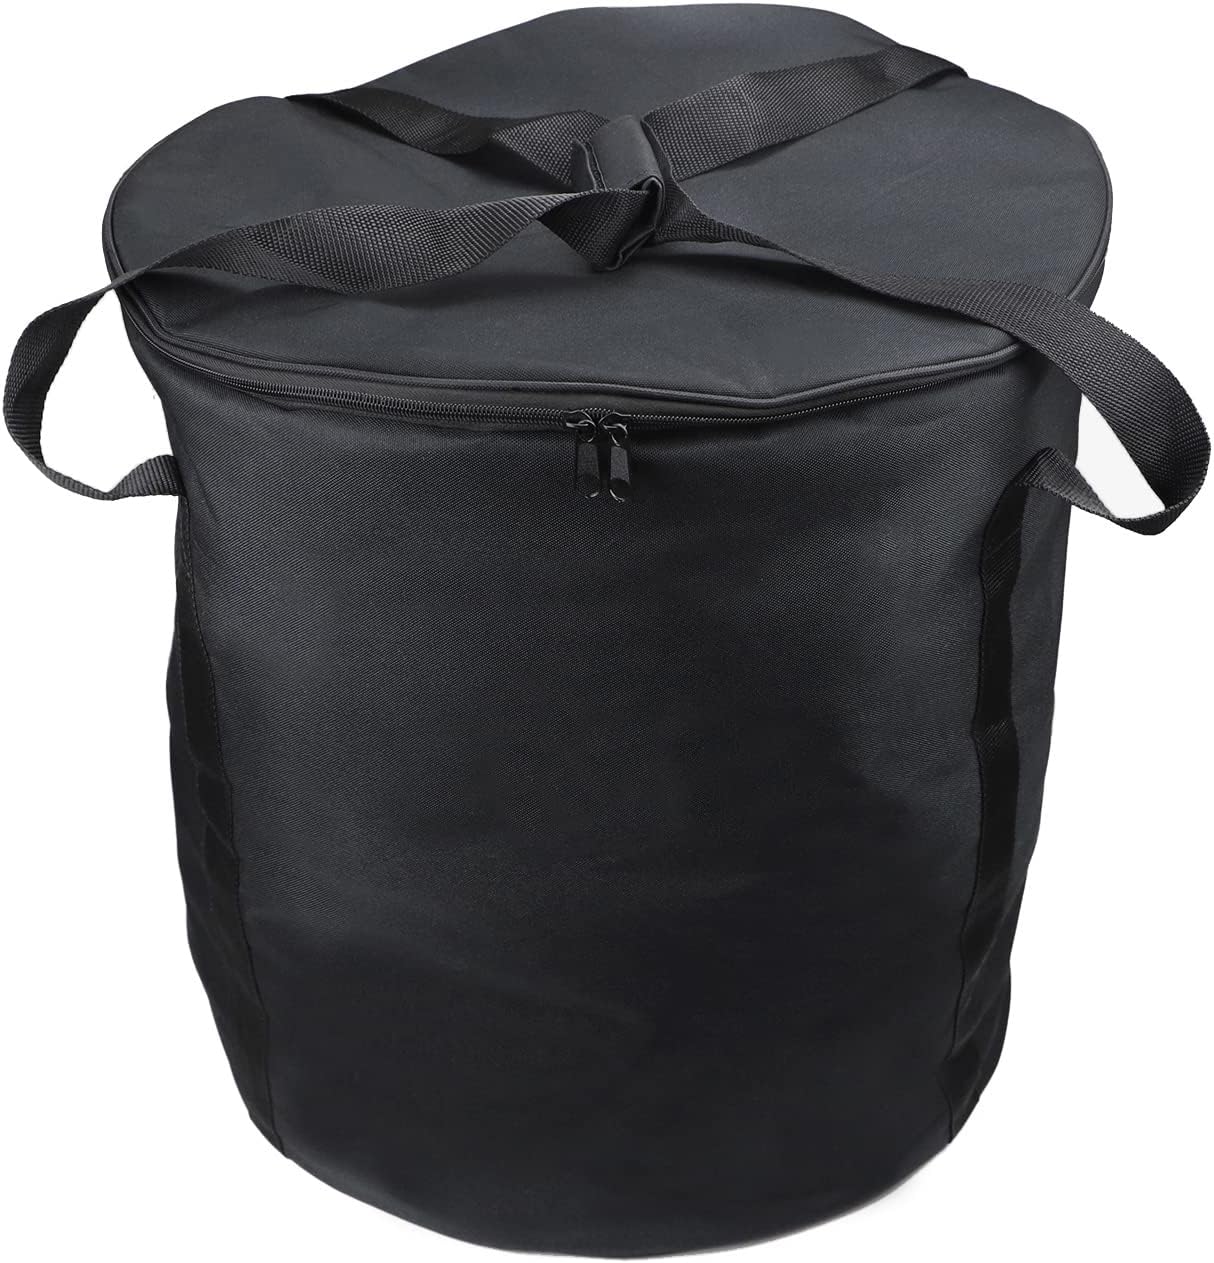 Carry Bag for Portable Satellite Antenna,Carry Case [...]